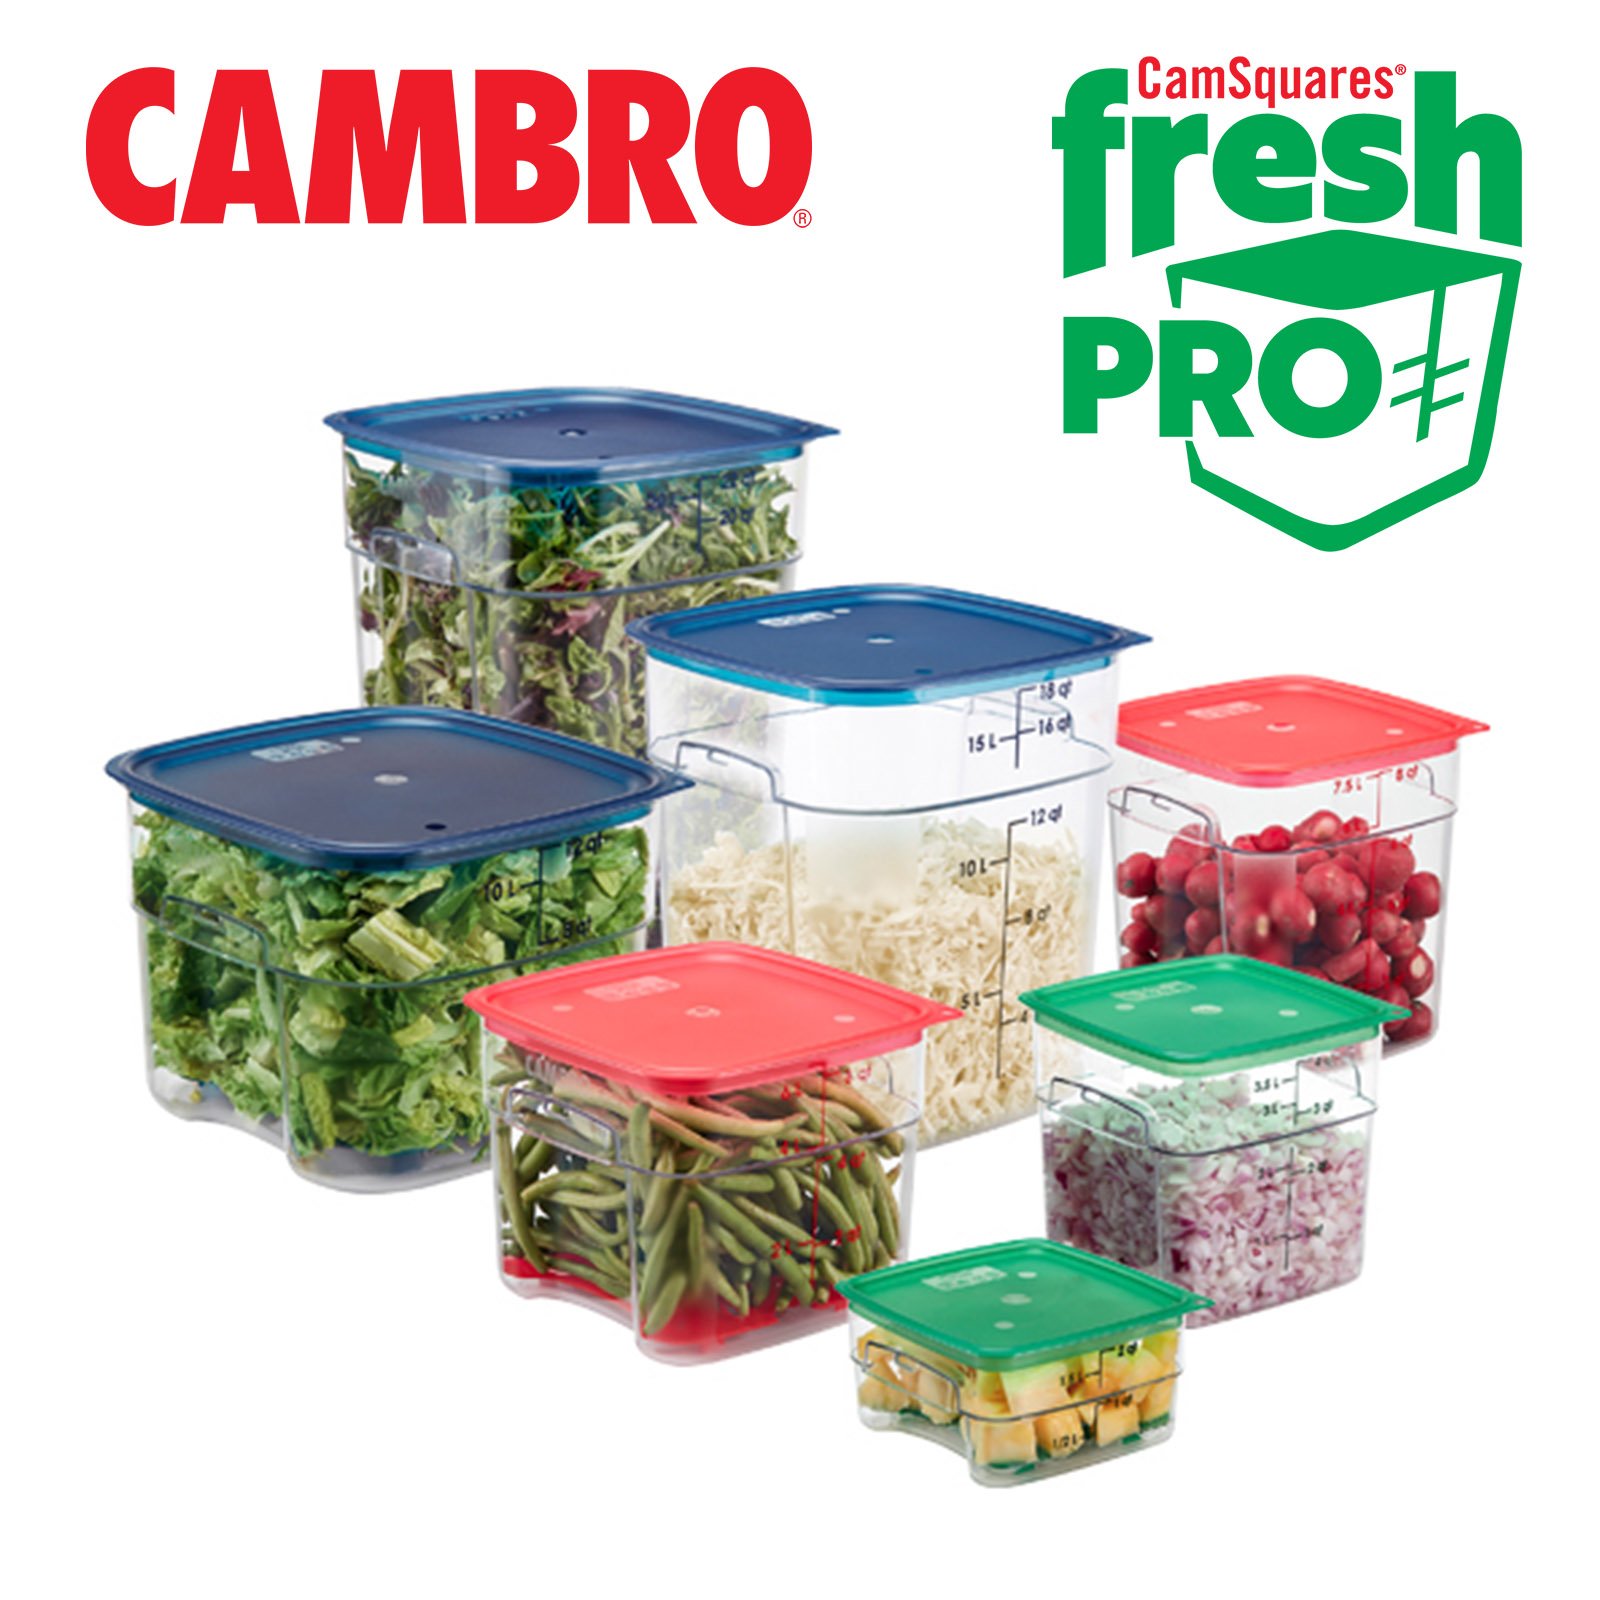 Cambro Debuts The Next Generation Of Food Storage